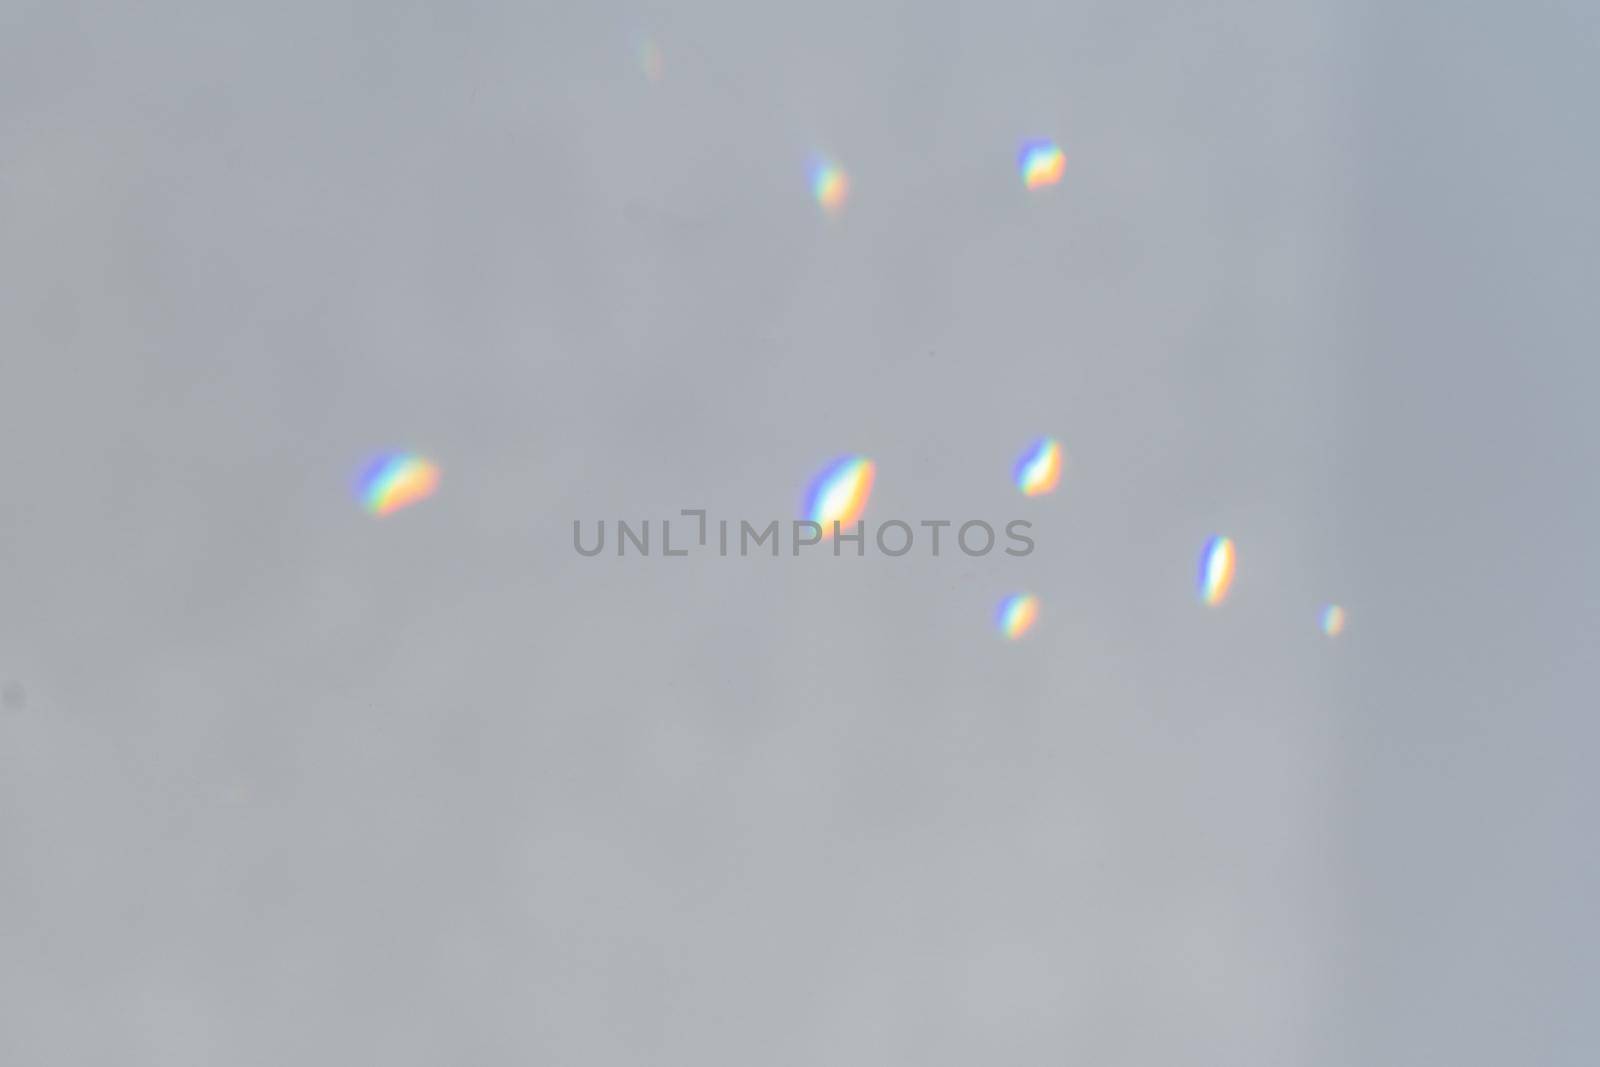 .Rainbow holographic shadow mock up, iridescent prismatic wallpaper. Abstract prism reflection, rays leaking through lens effect. Crystal light reflections for overlay mockup on light. by photolime